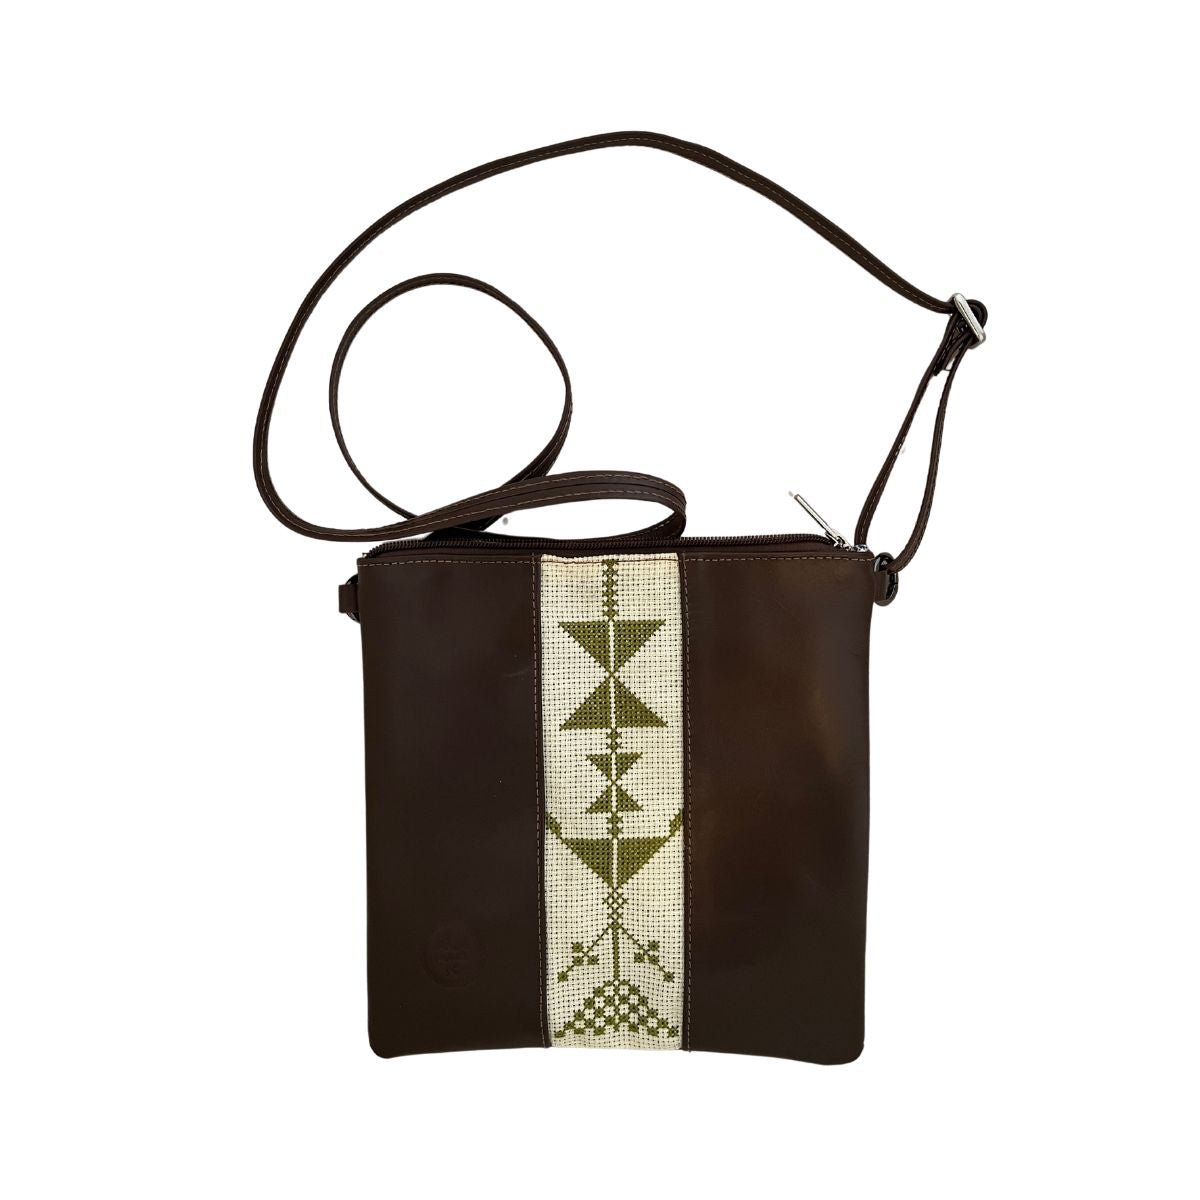 Leather Cross Body Bag with Embroidery (Dark Brown Leather)